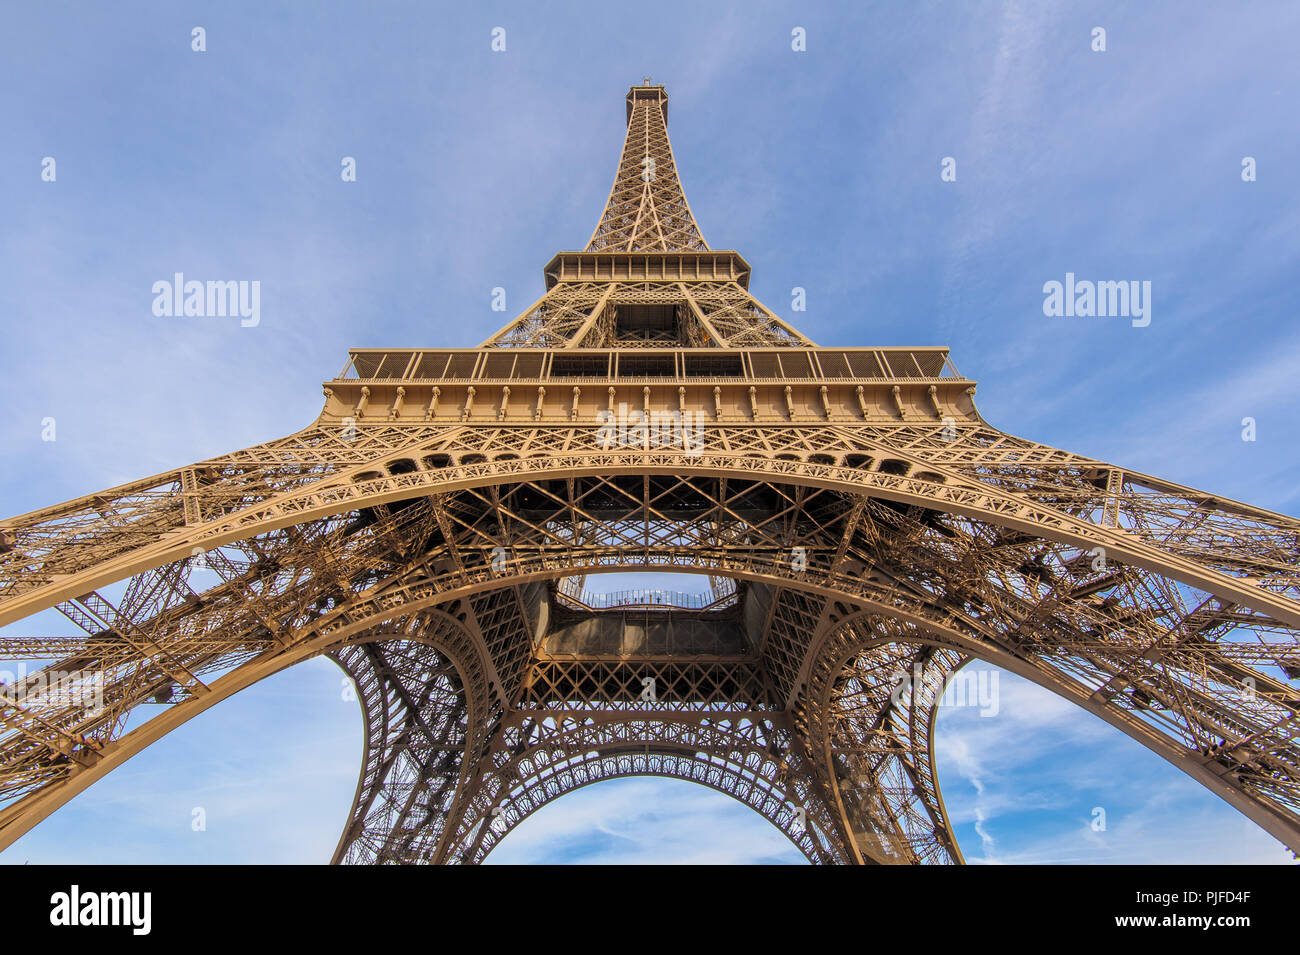 Elevation angle view of eiffel tower in paris Stock Photo